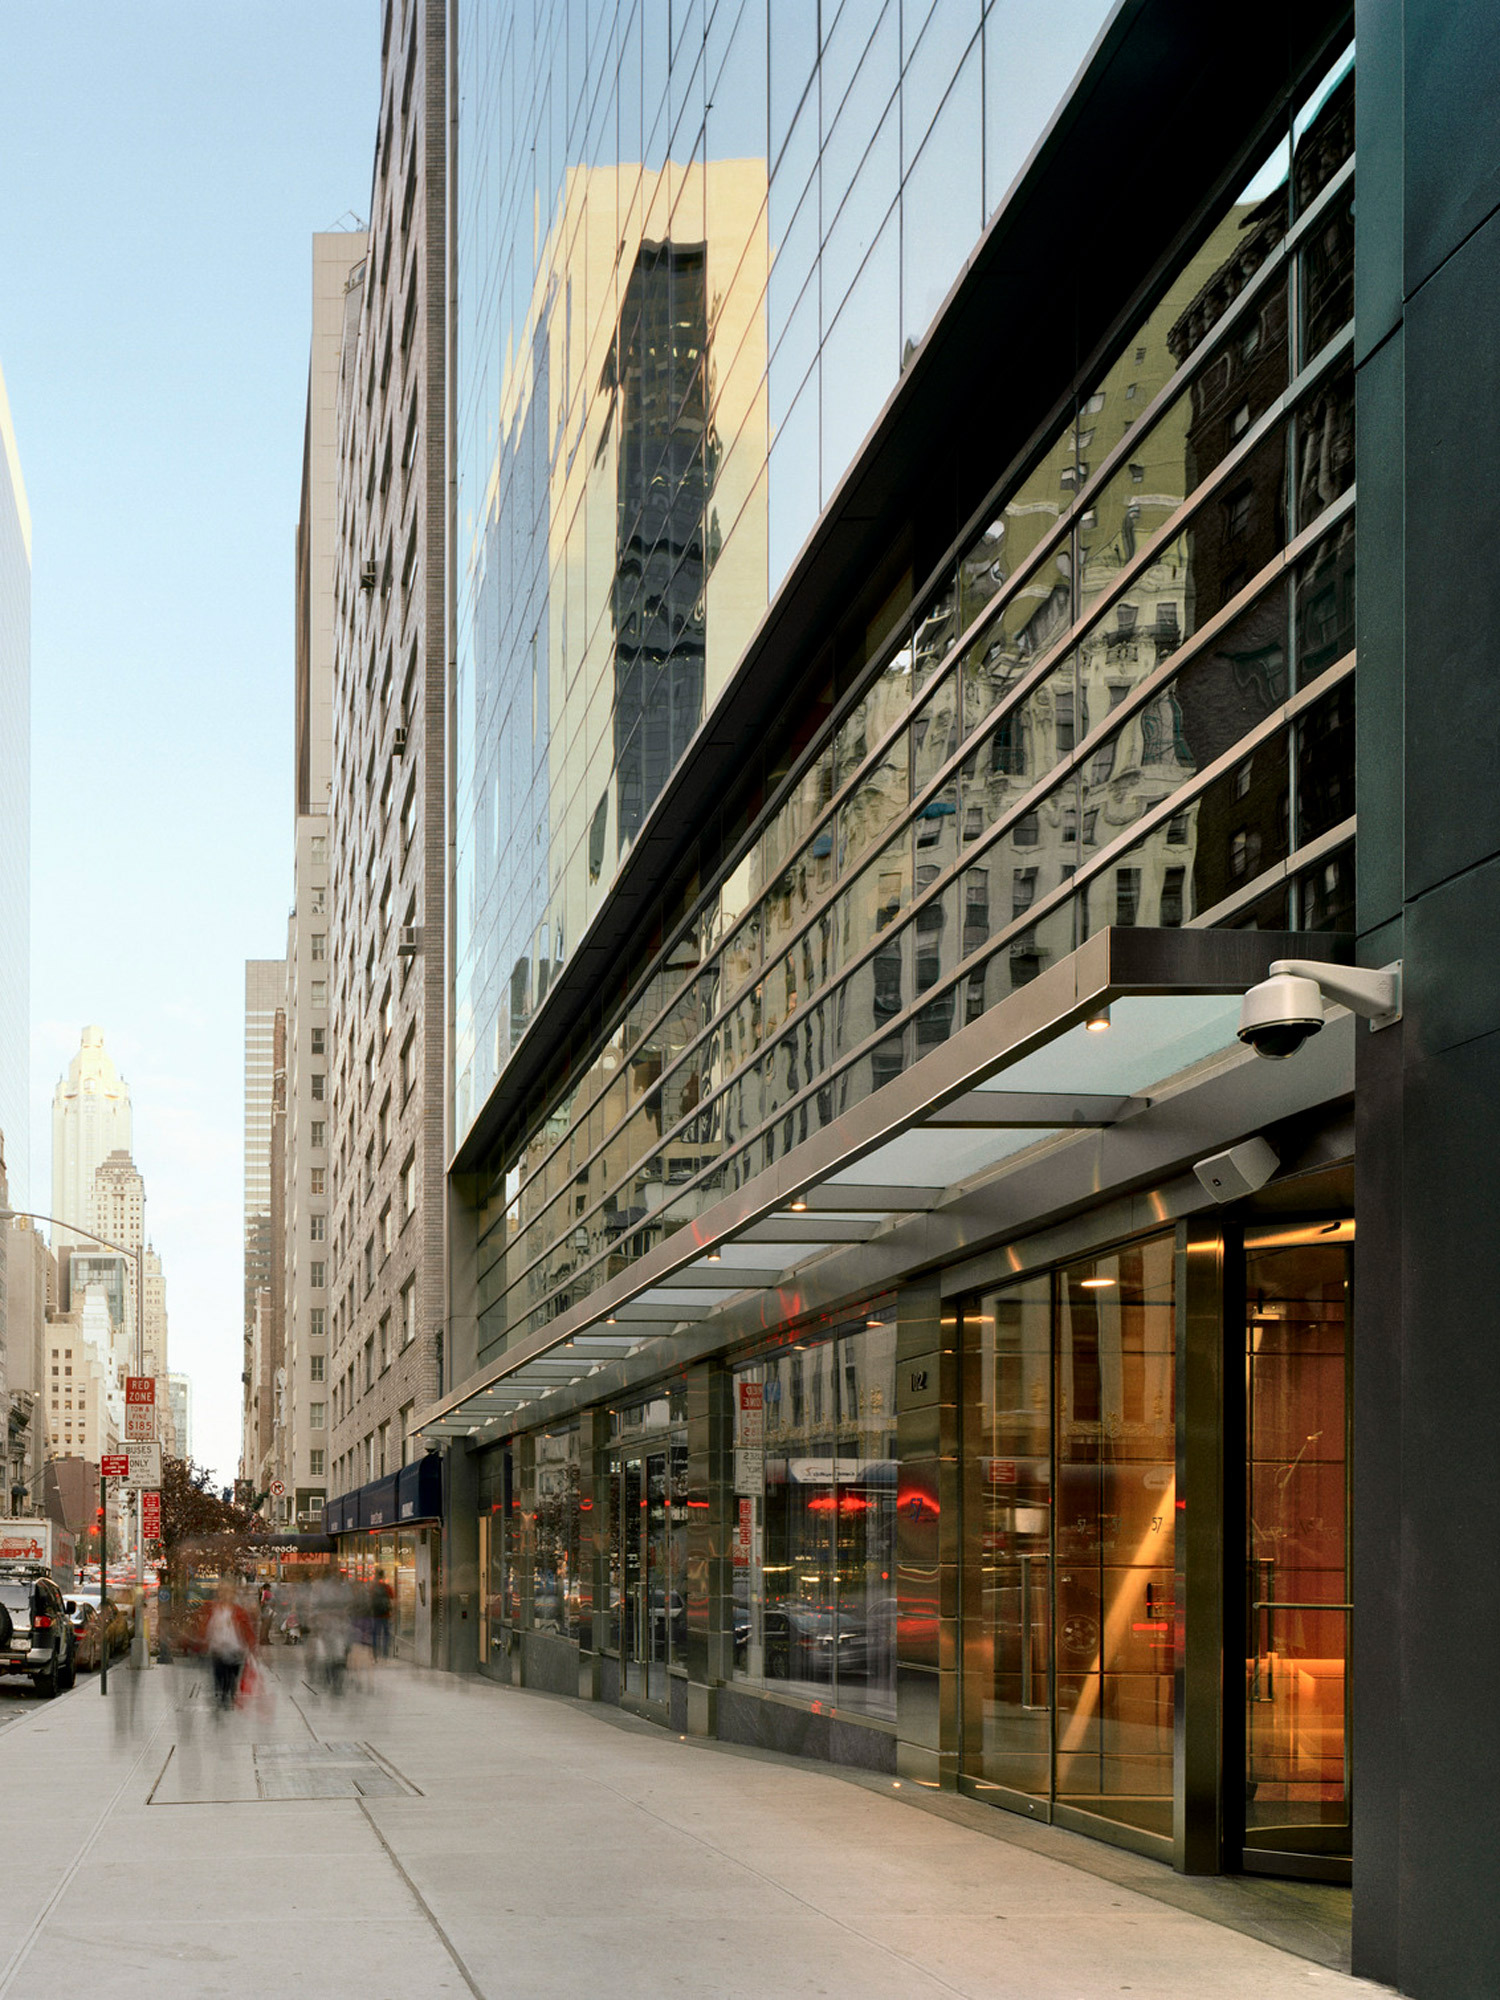 Exterior view of a modern building featuring reflective glass facade and asymmetrical windows, with pedestrians blurred in motion on a vibrant city street. The entrance boasts a sleek, overhanging canopy and recessed lighting, highlighting contemporary urban architecture.